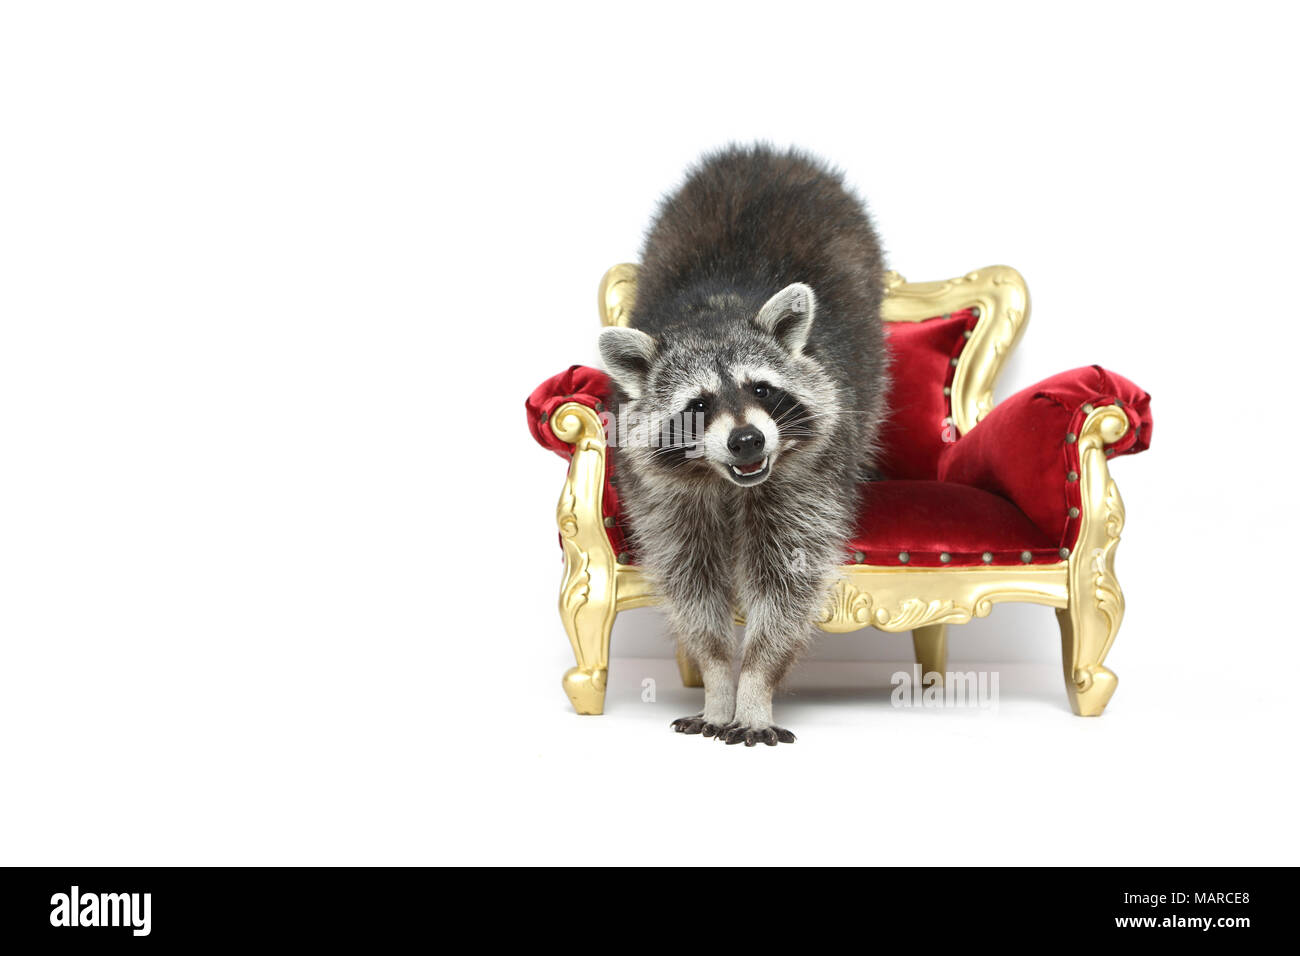 Raccoon (Procyon lotor). Adult standing on a baroque armchair. Studio picture against a white background. Germany Stock Photo